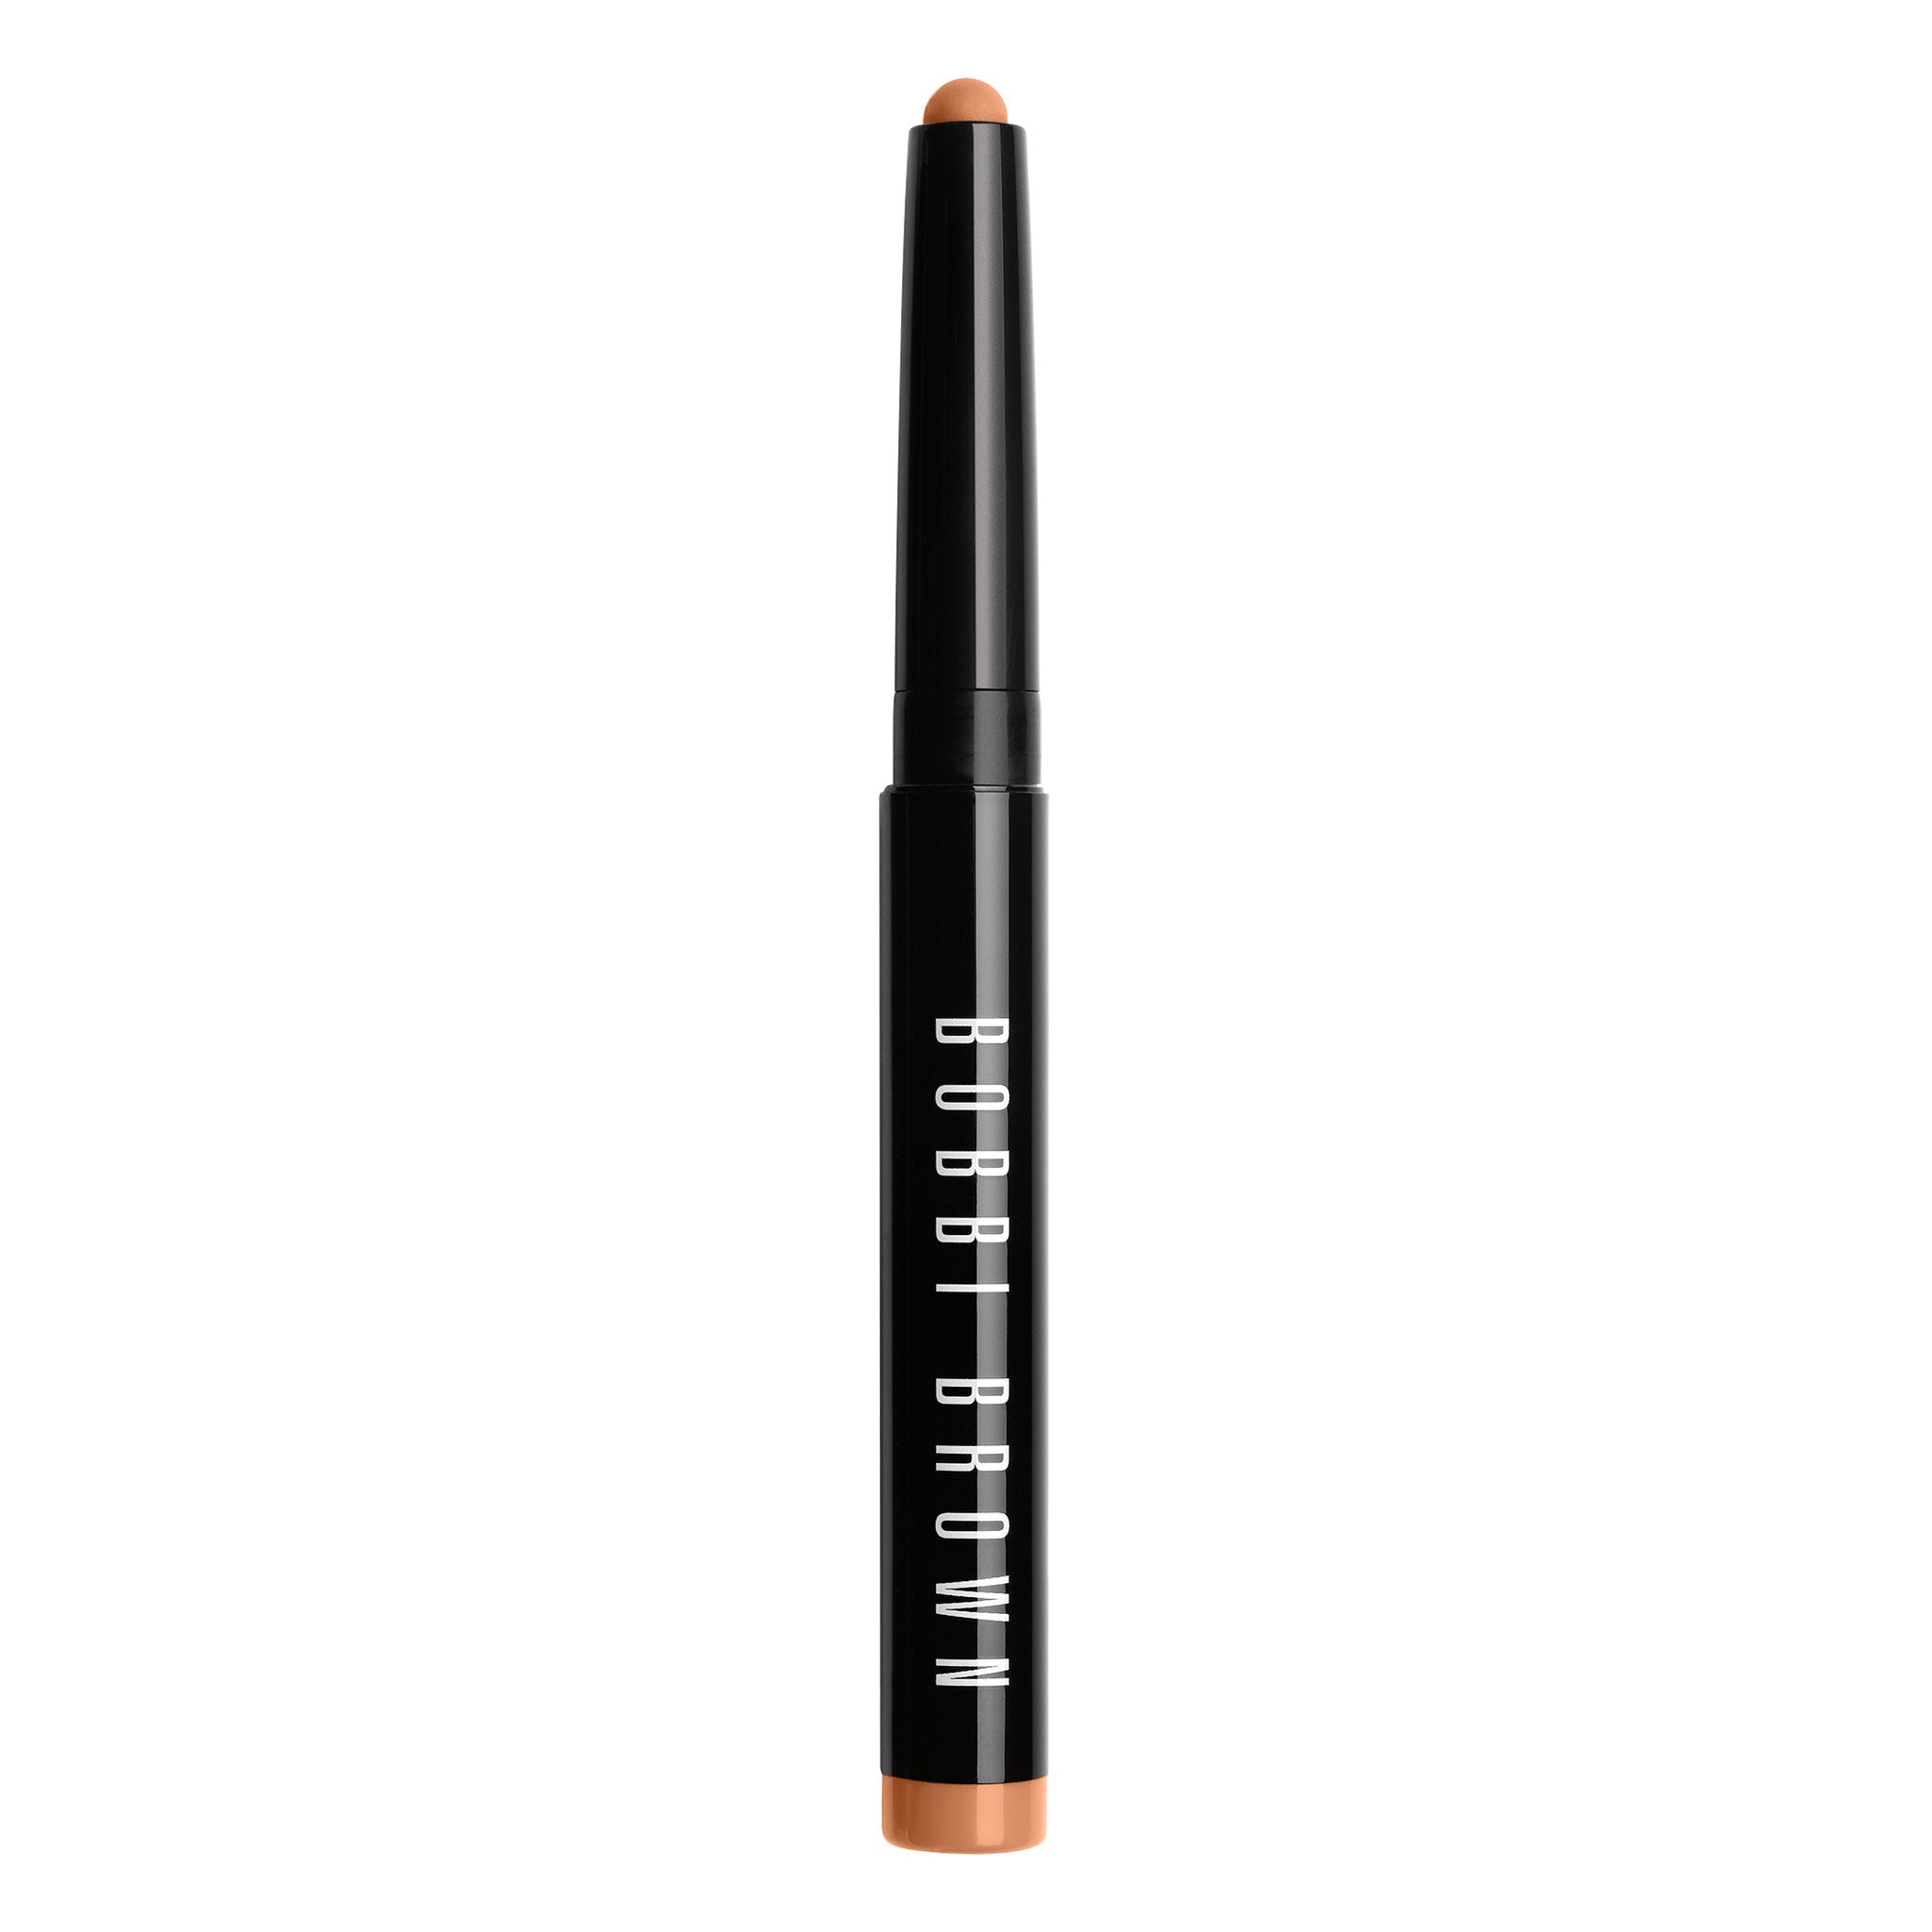 Bobbi Brown Long-Wear Cream Shadow Stick Color/Shade variant: Sand Dune main image. This product is in the color nude